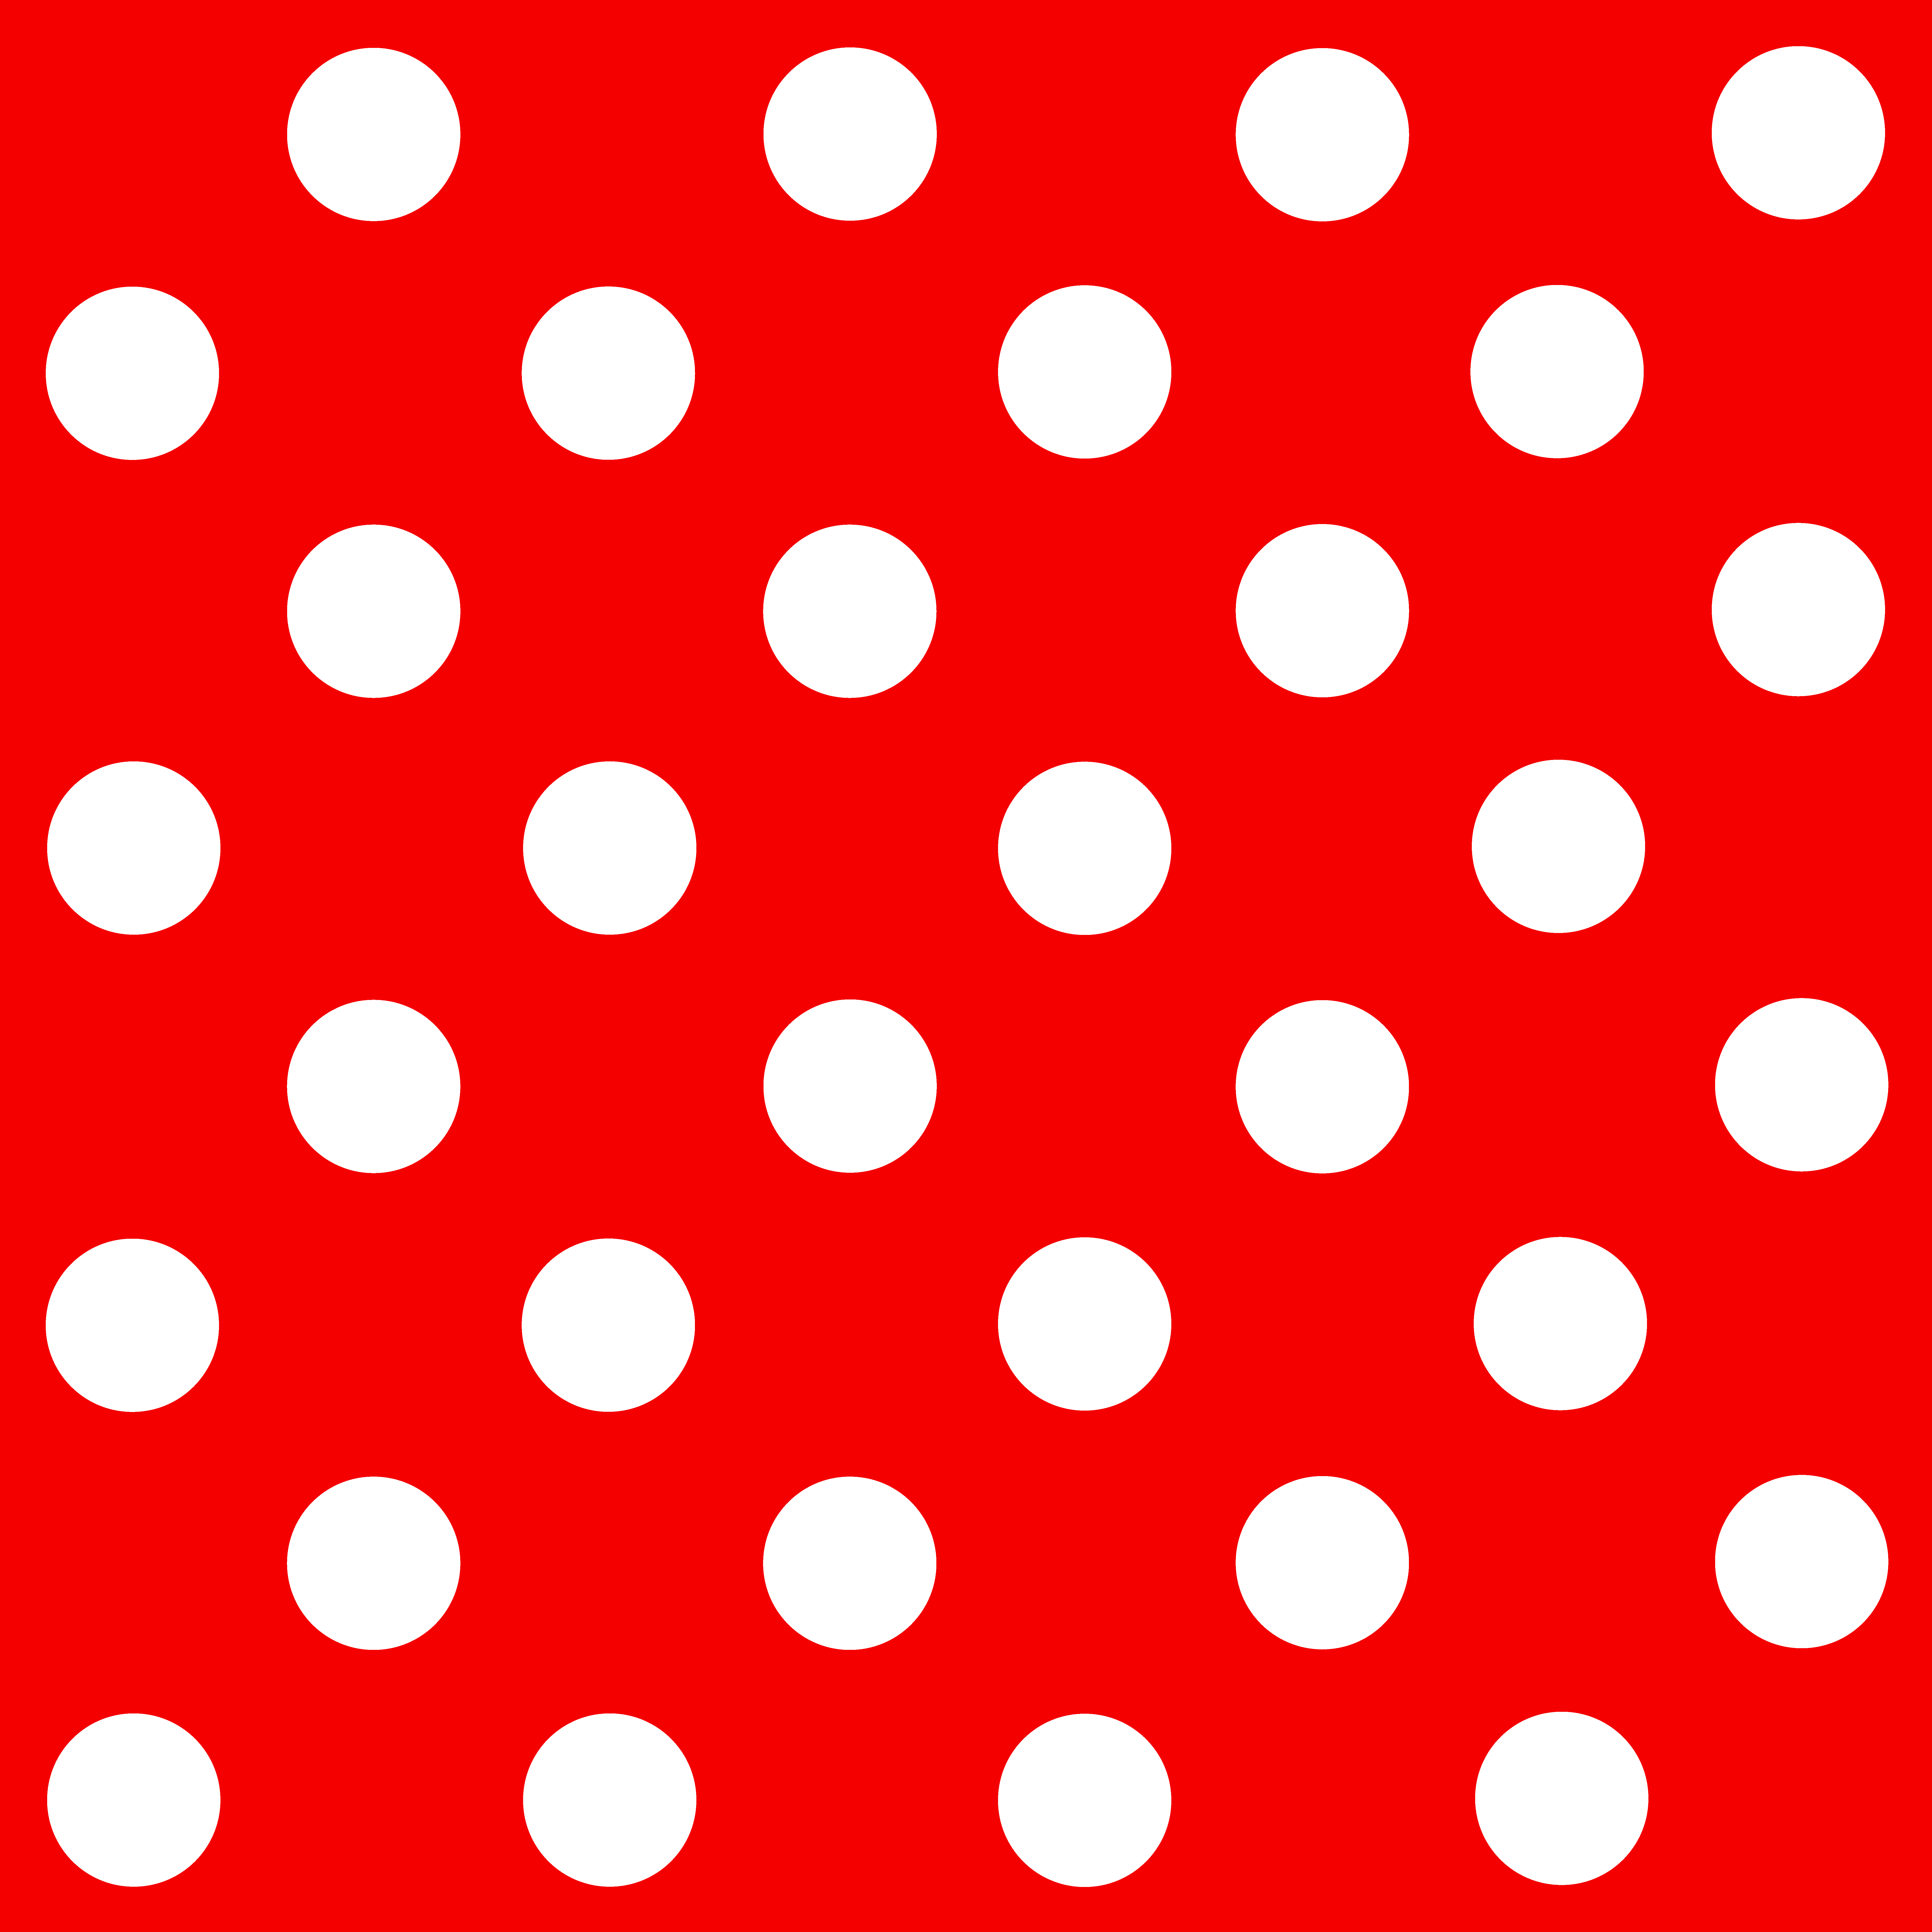 Clipart background red and green polka dot 